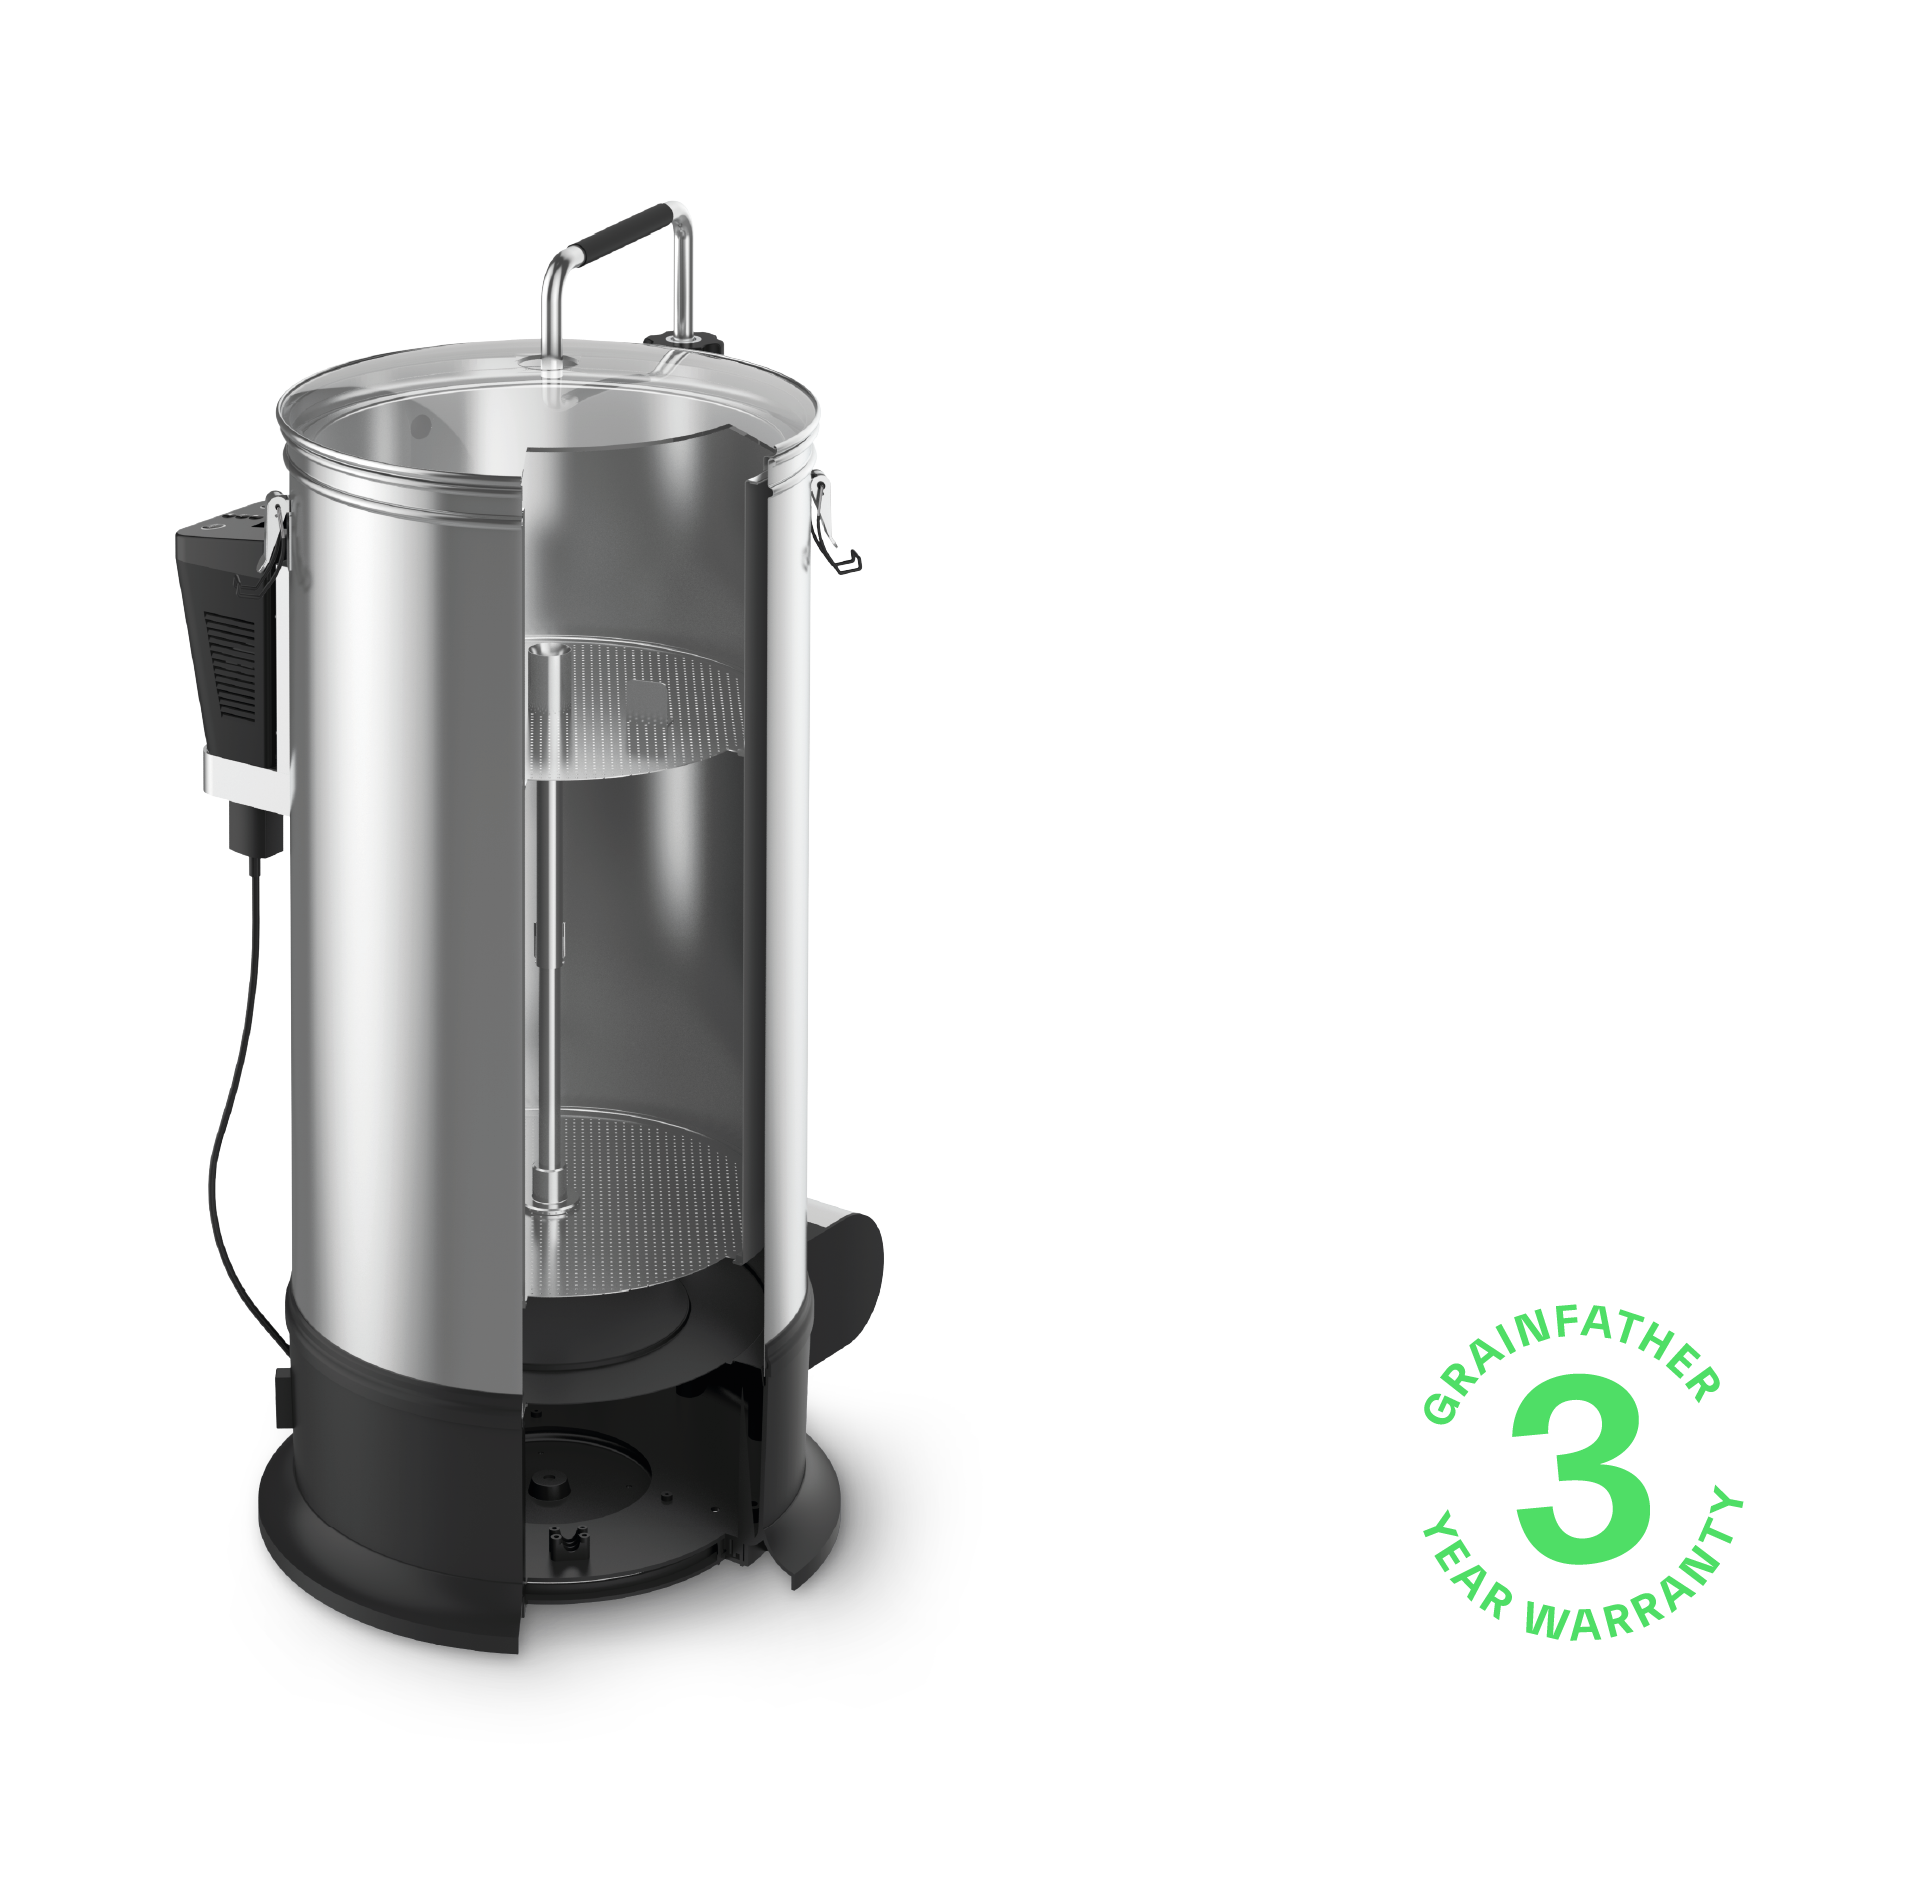 Grainfather G30 Features